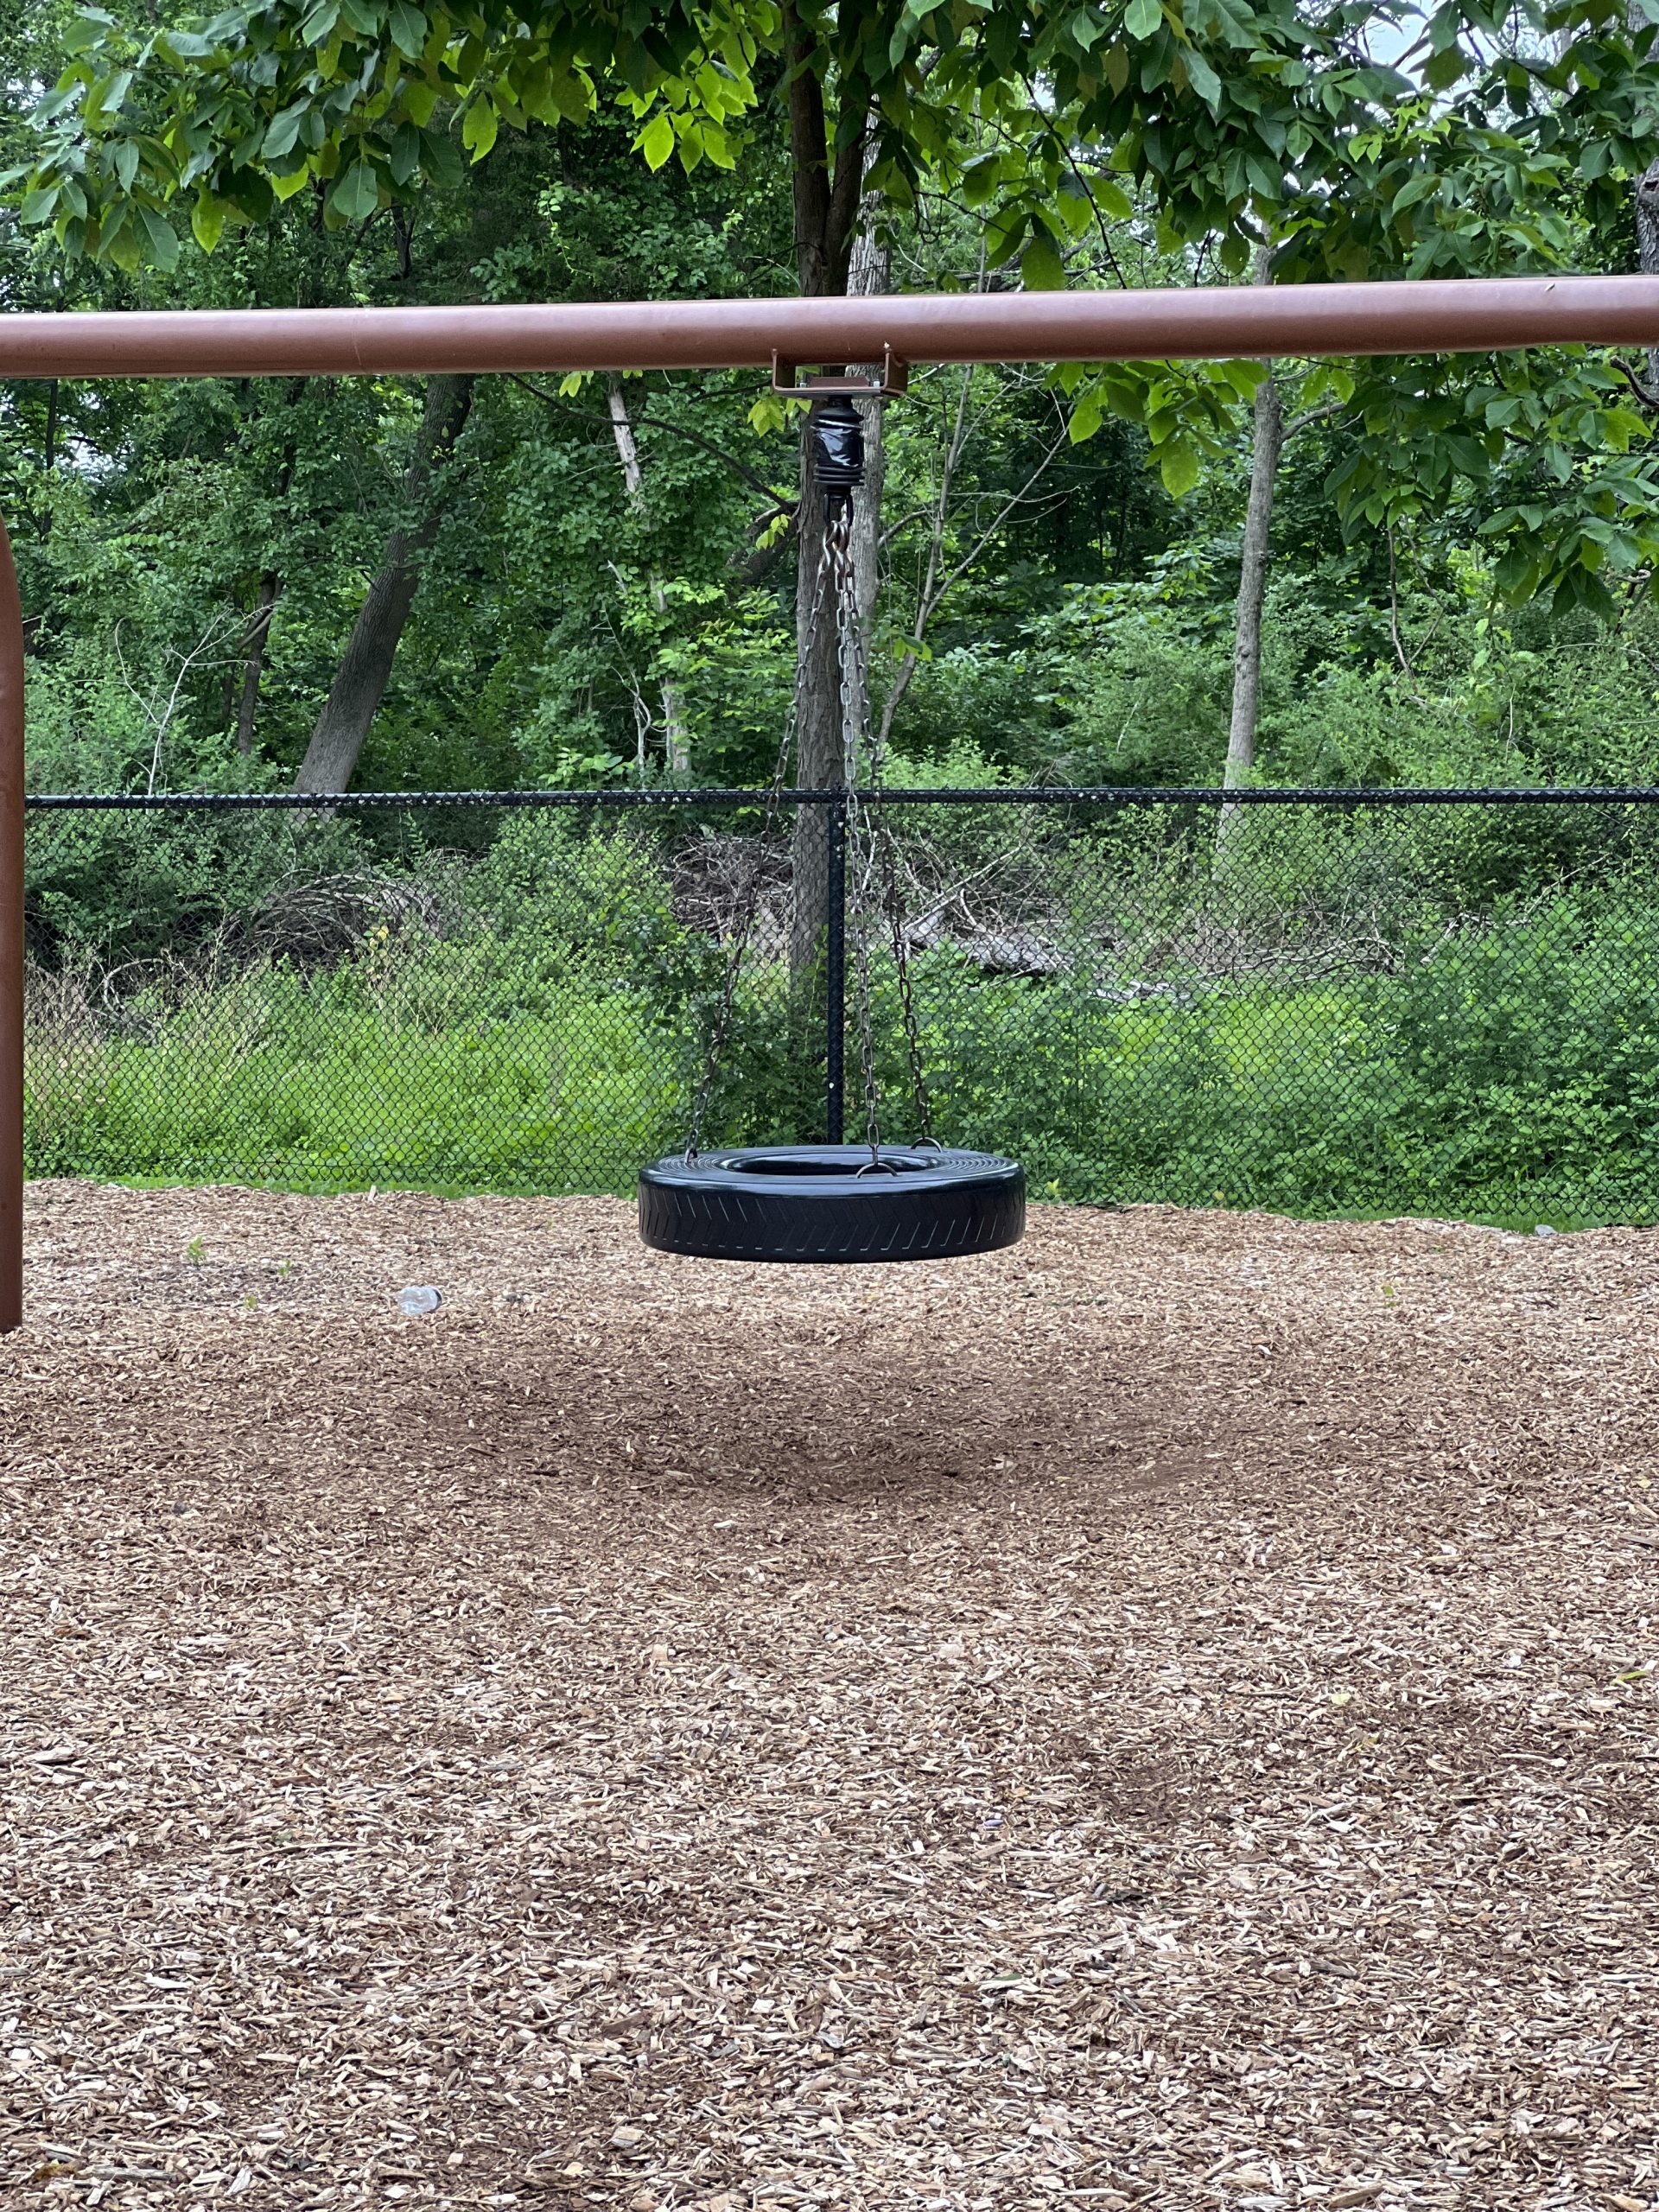 Tire swing at Kids Kastle Station Park Playground in Sparta NJ